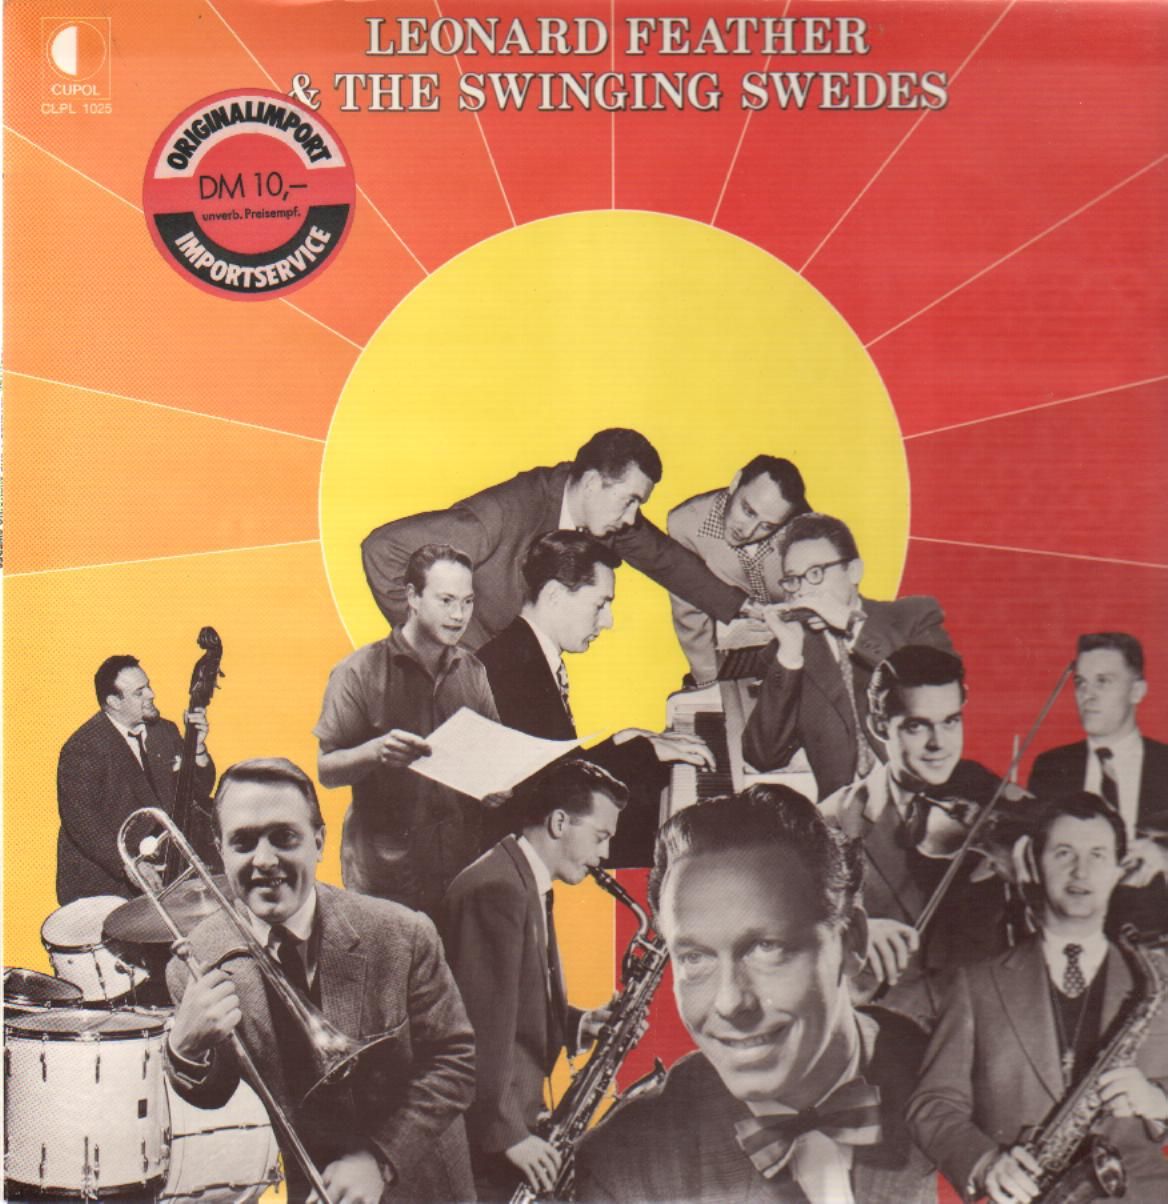 LEONARD FEATHER - Leonard Feather & The Swinging Swedes cover 